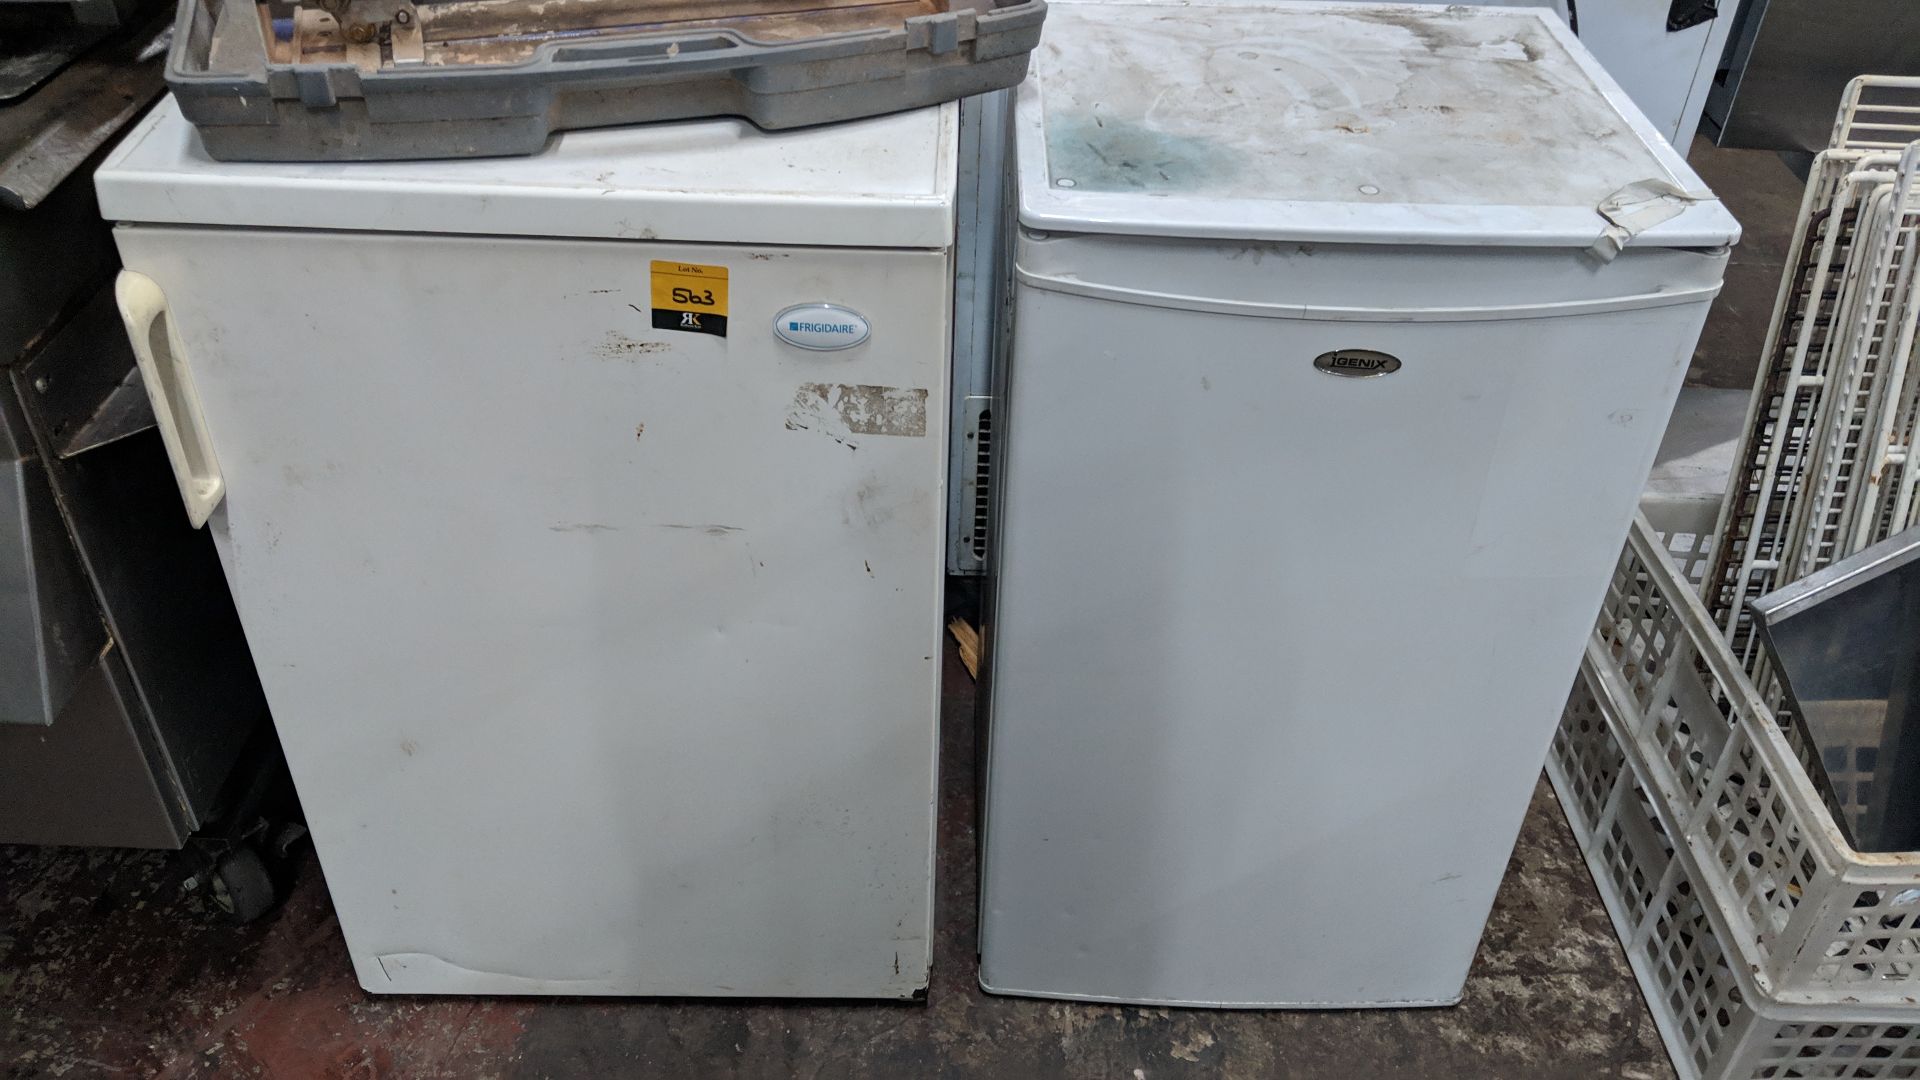 Pair of under counter fridges IMPORTANT: Please remember goods successfully bid upon must be paid